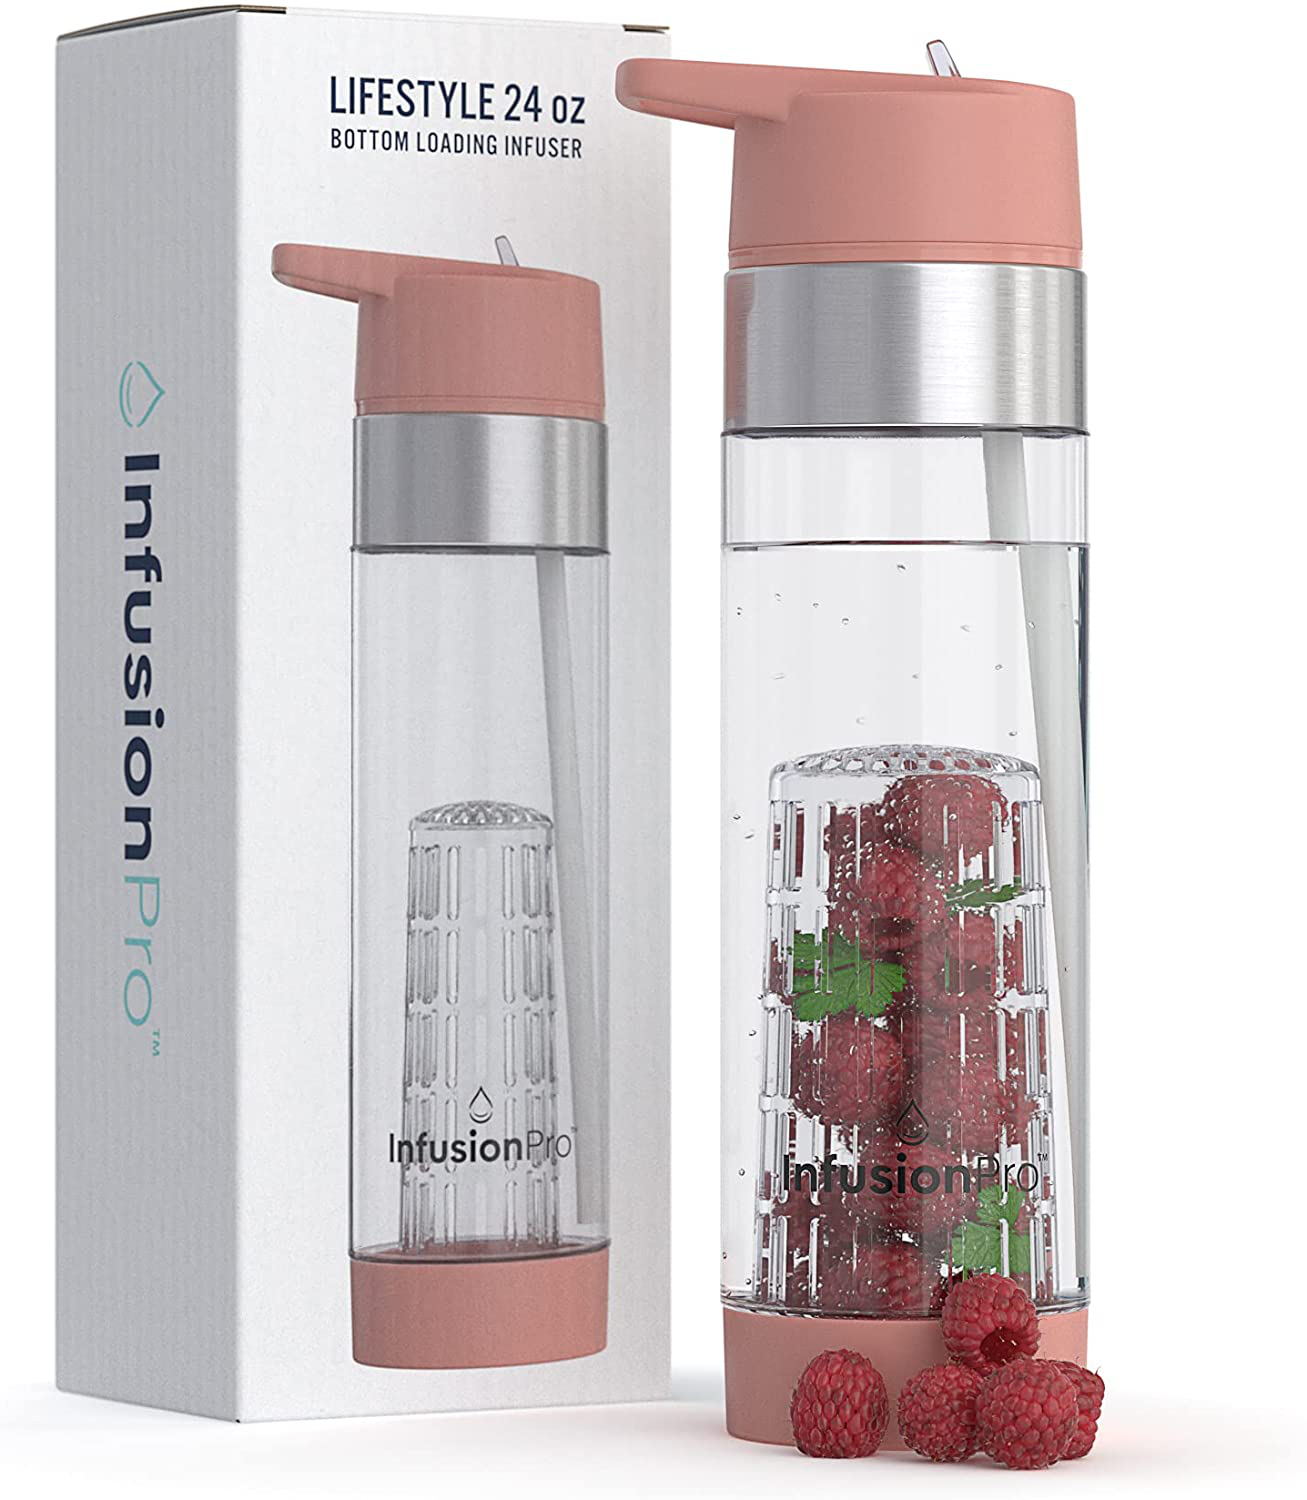 Infusion Pro Fruit Infuser Water Bottle with Straw Lid 24 oz : Flip-Up Water Bottle Straw : Insulated Sleeve & Fruit Infusion Water eBook : Bottom Loading Water Infuser for More Flavor - Kauai Sunset